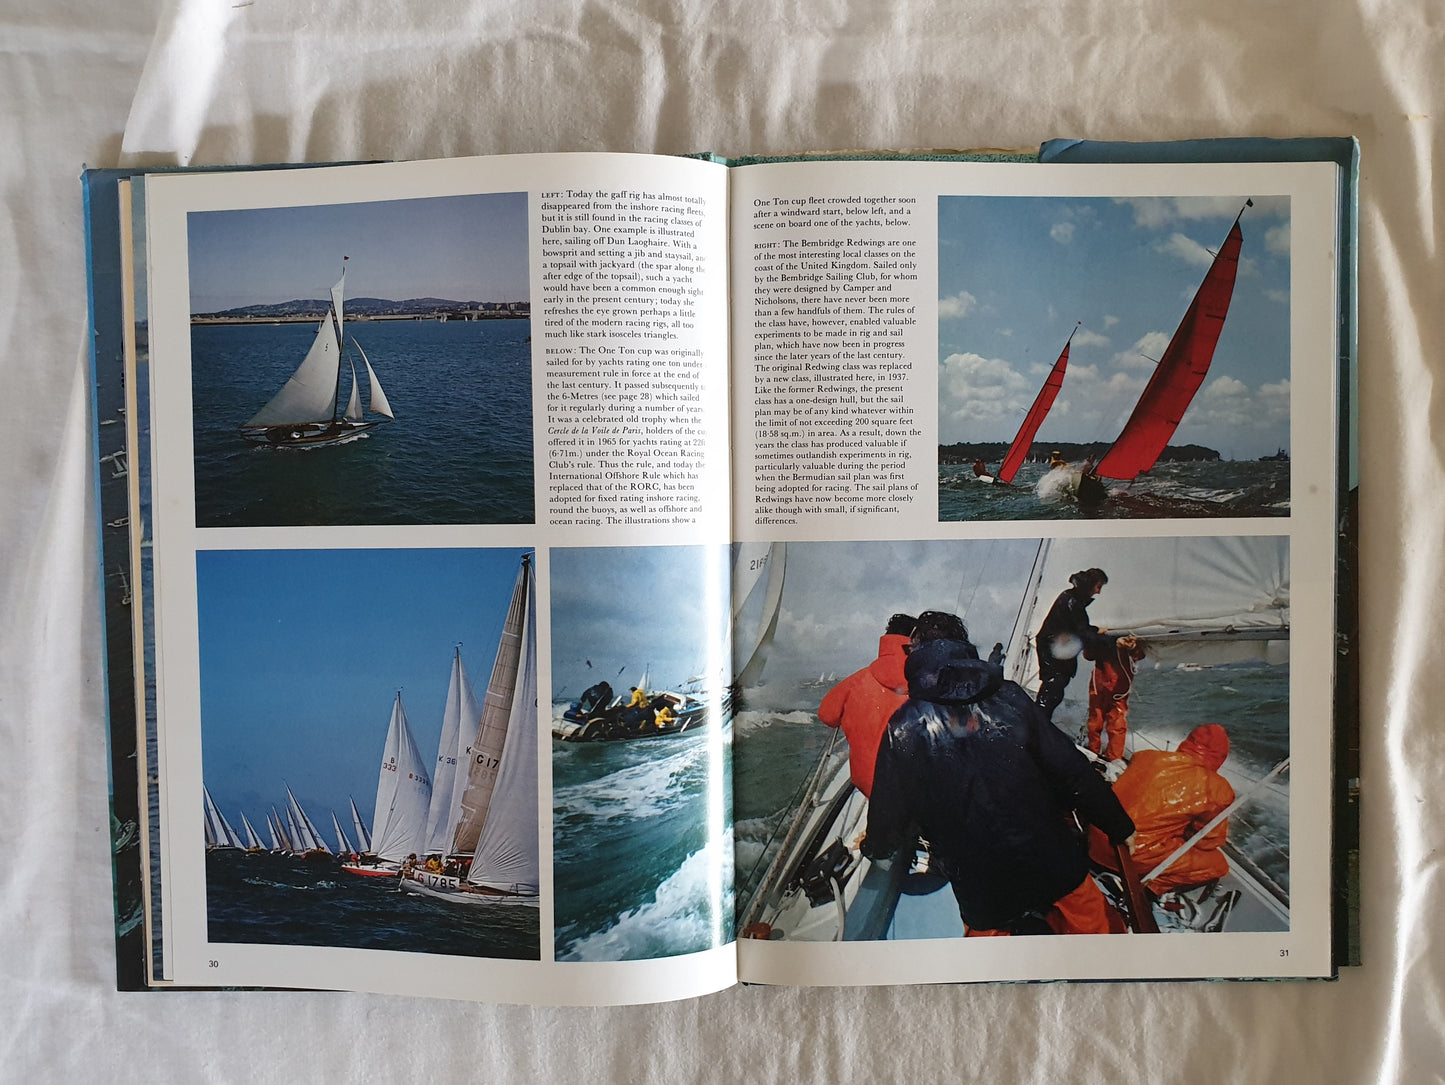 The Love of Sailing by Douglas Phillips-Birt